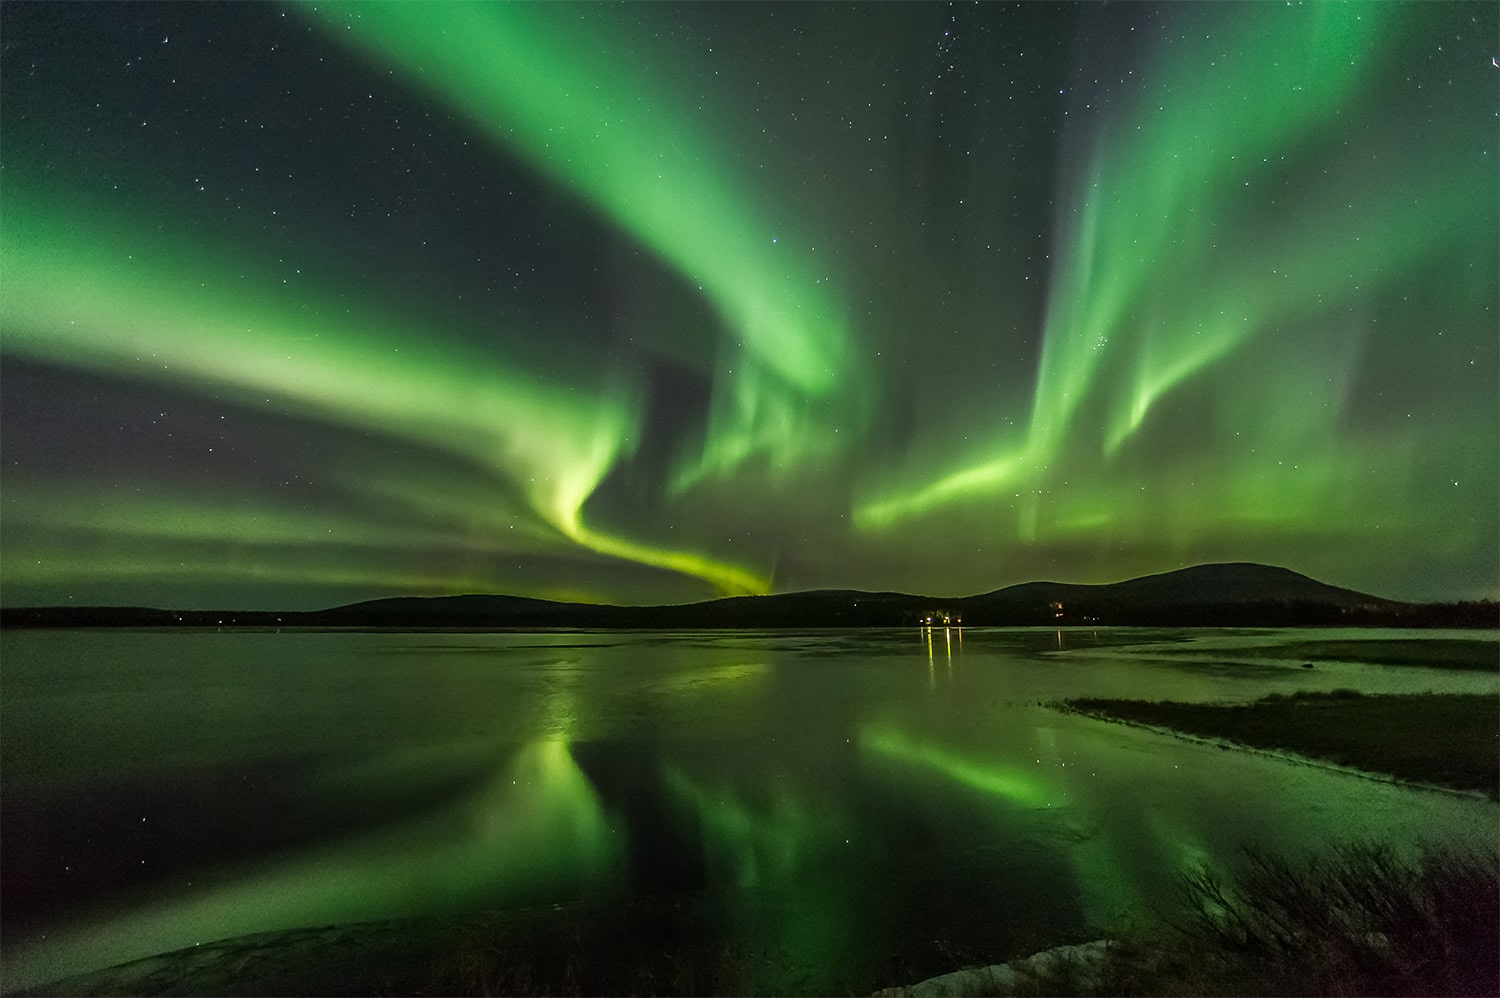 35 interesting facts about Northern lights